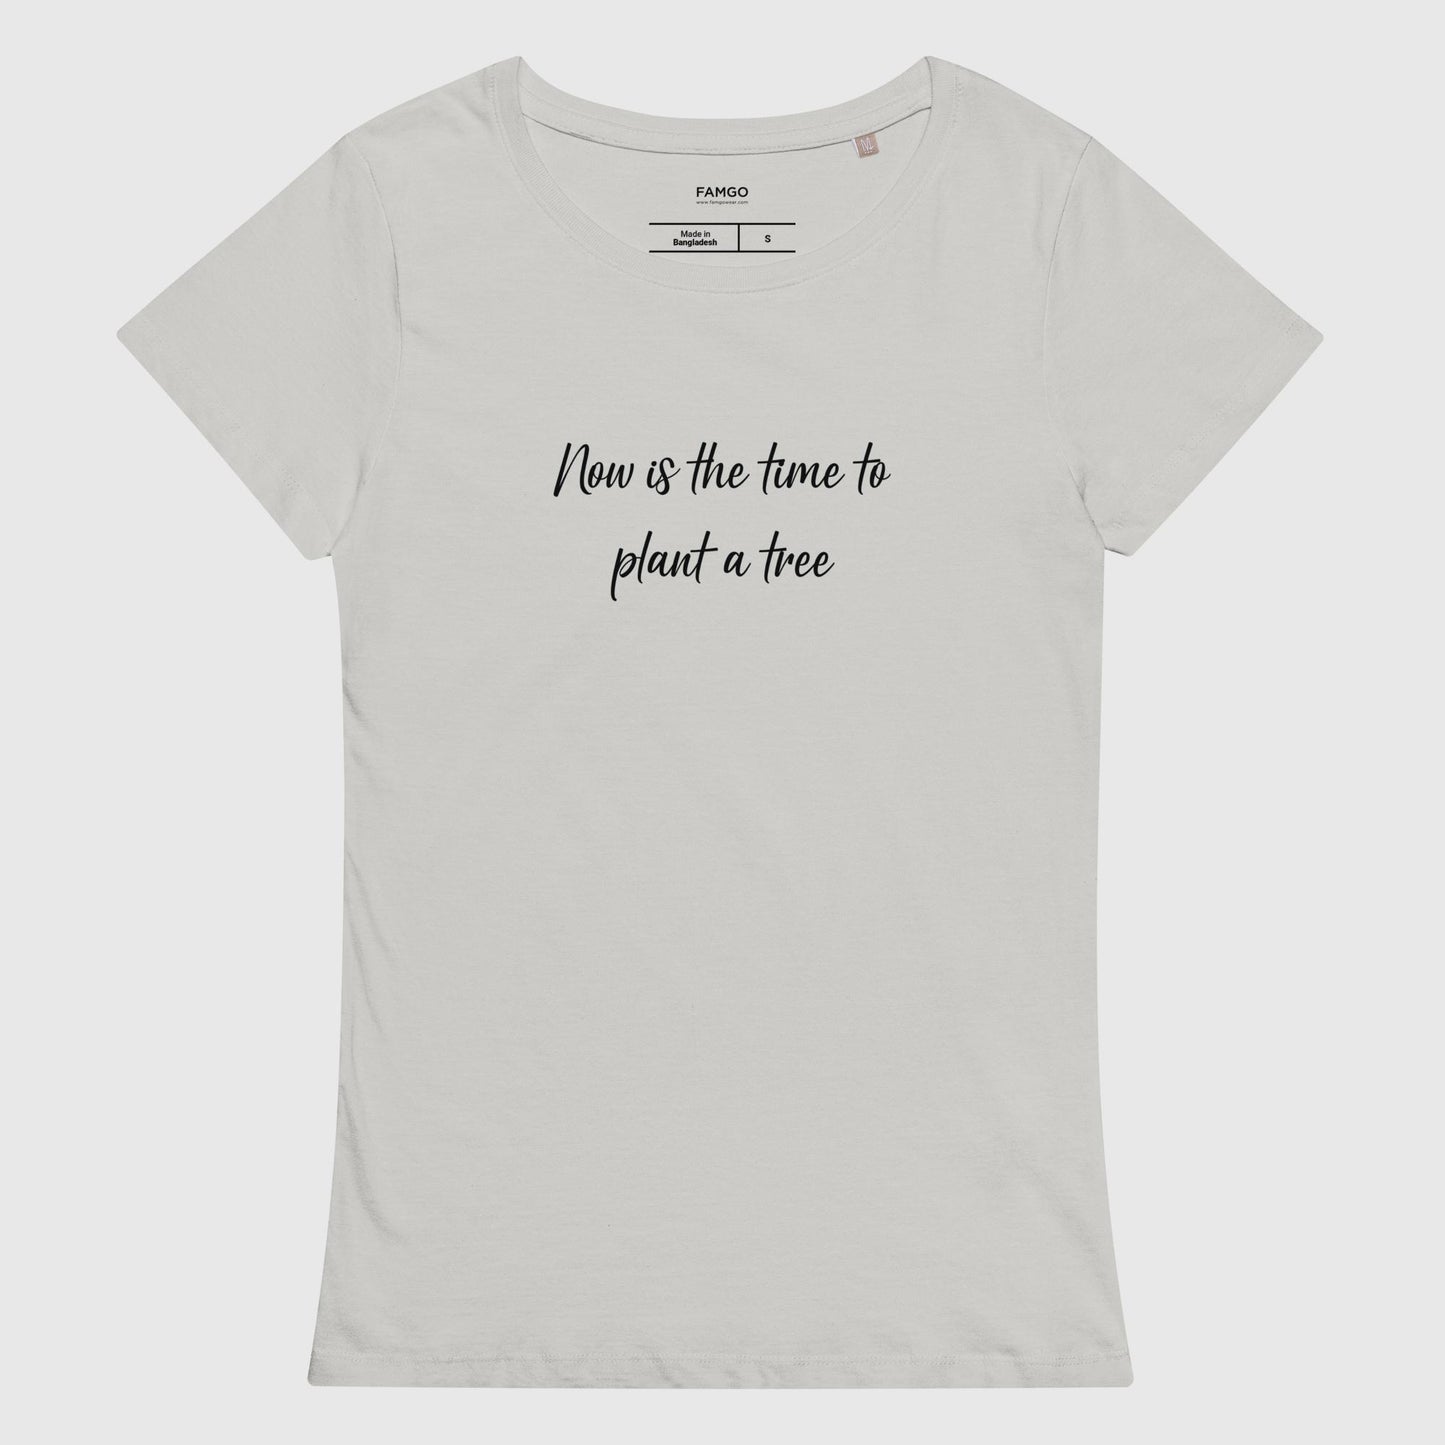 Women's gray organic cotton t-shirt that features, "Now is the time to plant a tree,' inspired by the Chinese proverb, "The best time to plant a tree was 20 years ago. The second best time is now."